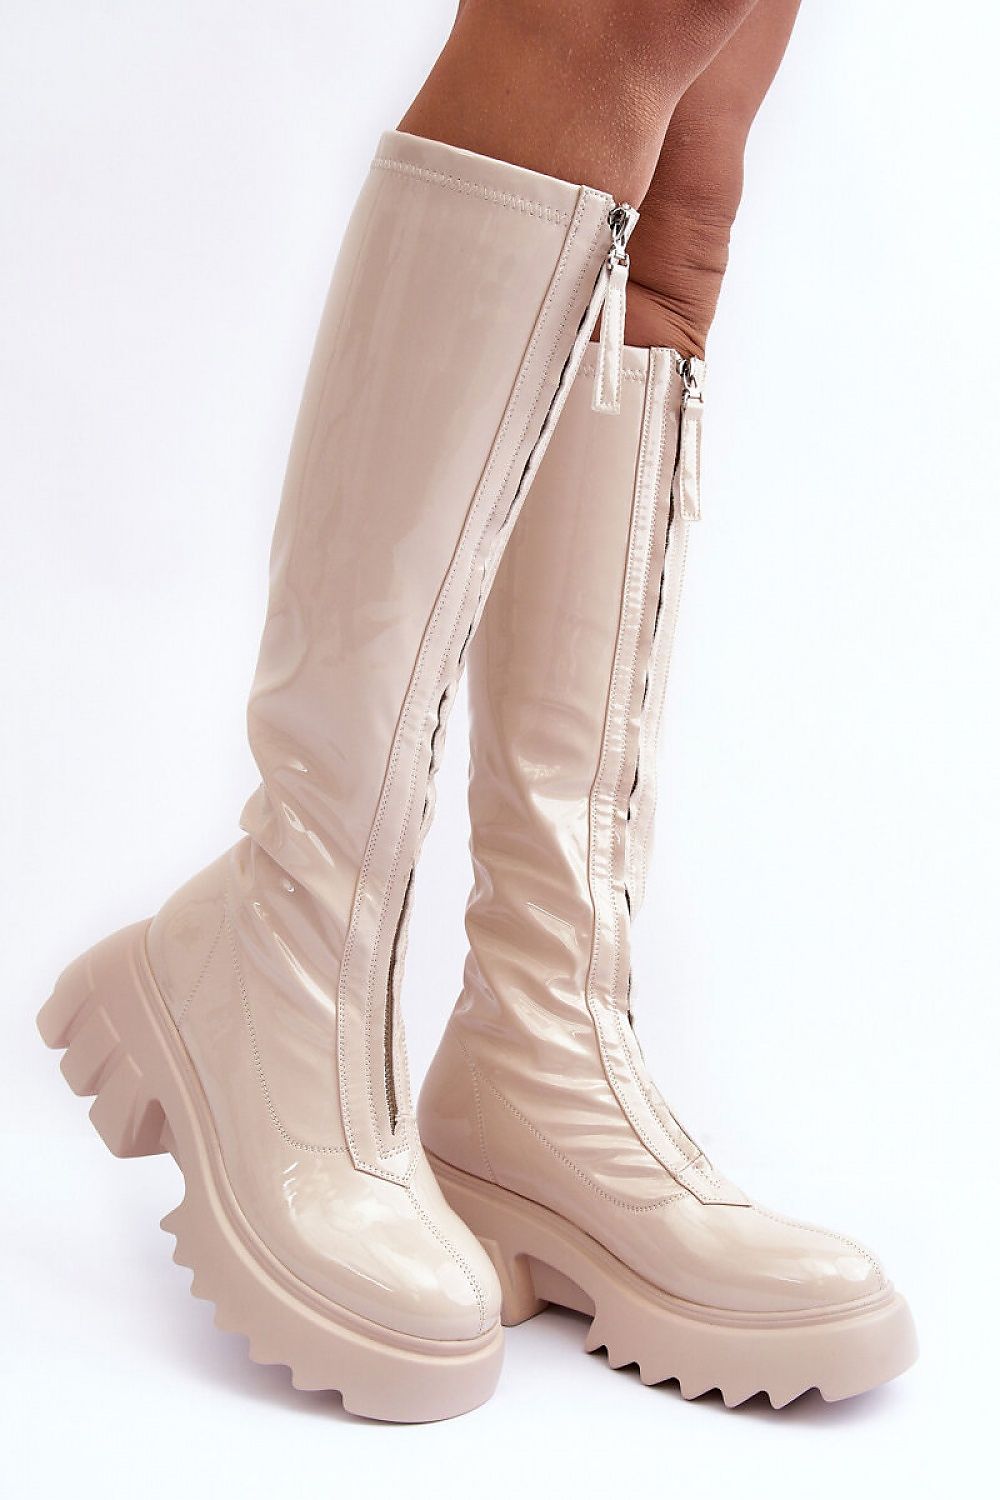 Thigh-Hight Boots Step in style